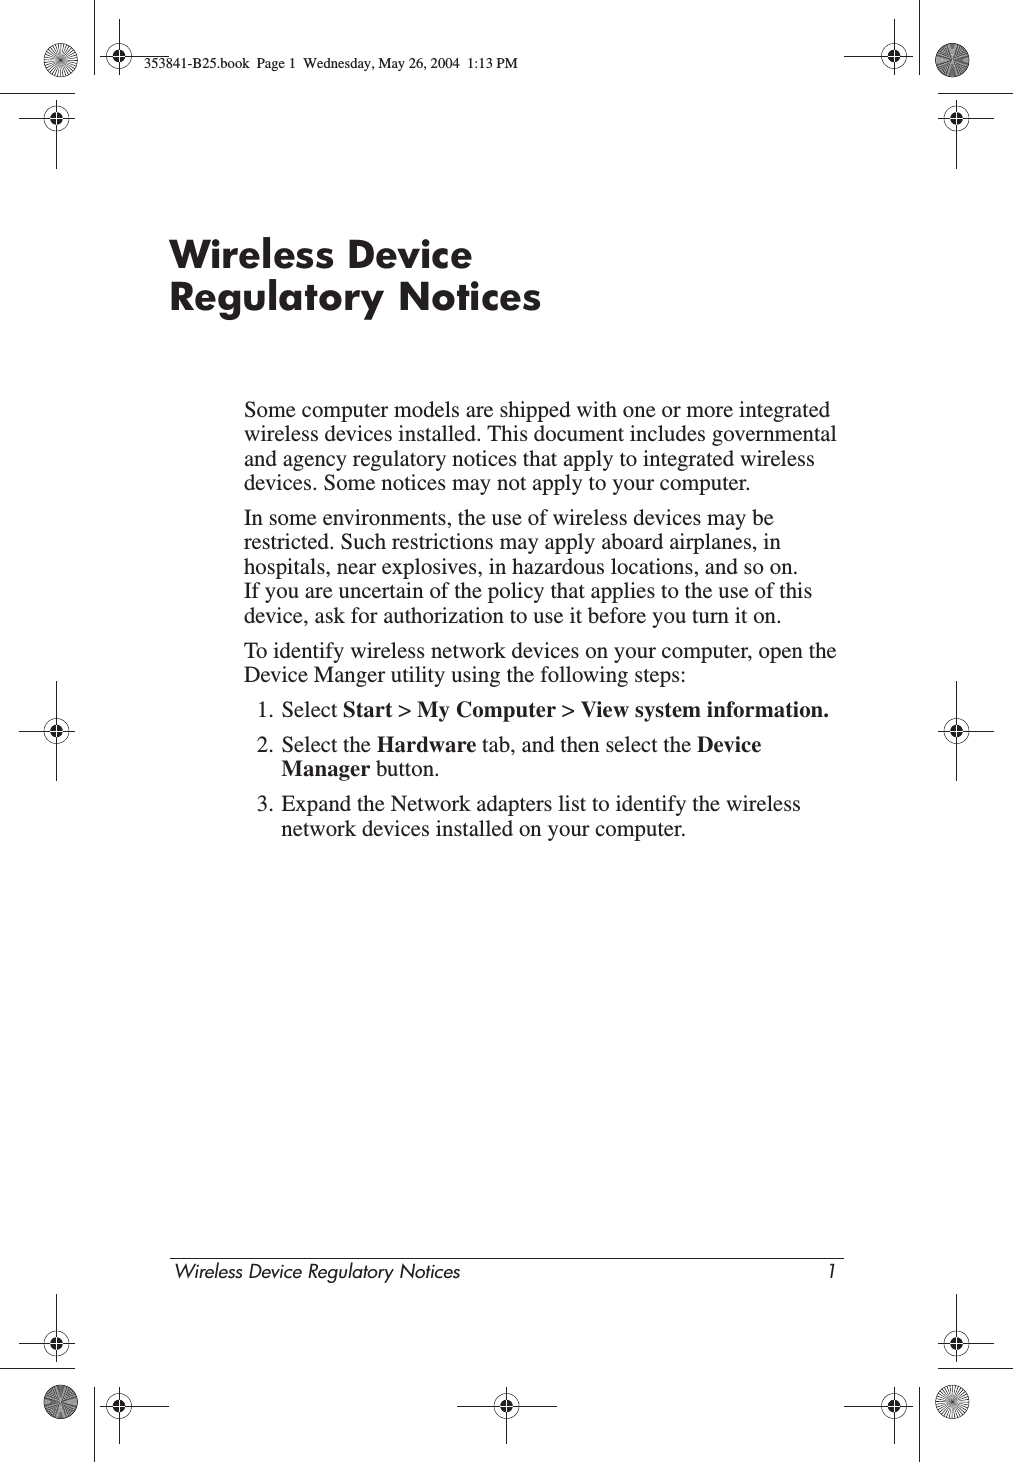 Wireless Device Regulatory Notices 1Wireless Device Regulatory NoticesSome computer models are shipped with one or more integrated wireless devices installed. This document includes governmental and agency regulatory notices that apply to integrated wireless devices. Some notices may not apply to your computer.In some environments, the use of wireless devices may be restricted. Such restrictions may apply aboard airplanes, in hospitals, near explosives, in hazardous locations, and so on. If you are uncertain of the policy that applies to the use of this device, ask for authorization to use it before you turn it on.To identify wireless network devices on your computer, open the Device Manger utility using the following steps:1. Select Start &gt; My Computer &gt; View system information. 2. Select the Hardware tab, and then select the Device Manager button.3. Expand the Network adapters list to identify the wireless network devices installed on your computer.353841-B25.book  Page 1  Wednesday, May 26, 2004  1:13 PM